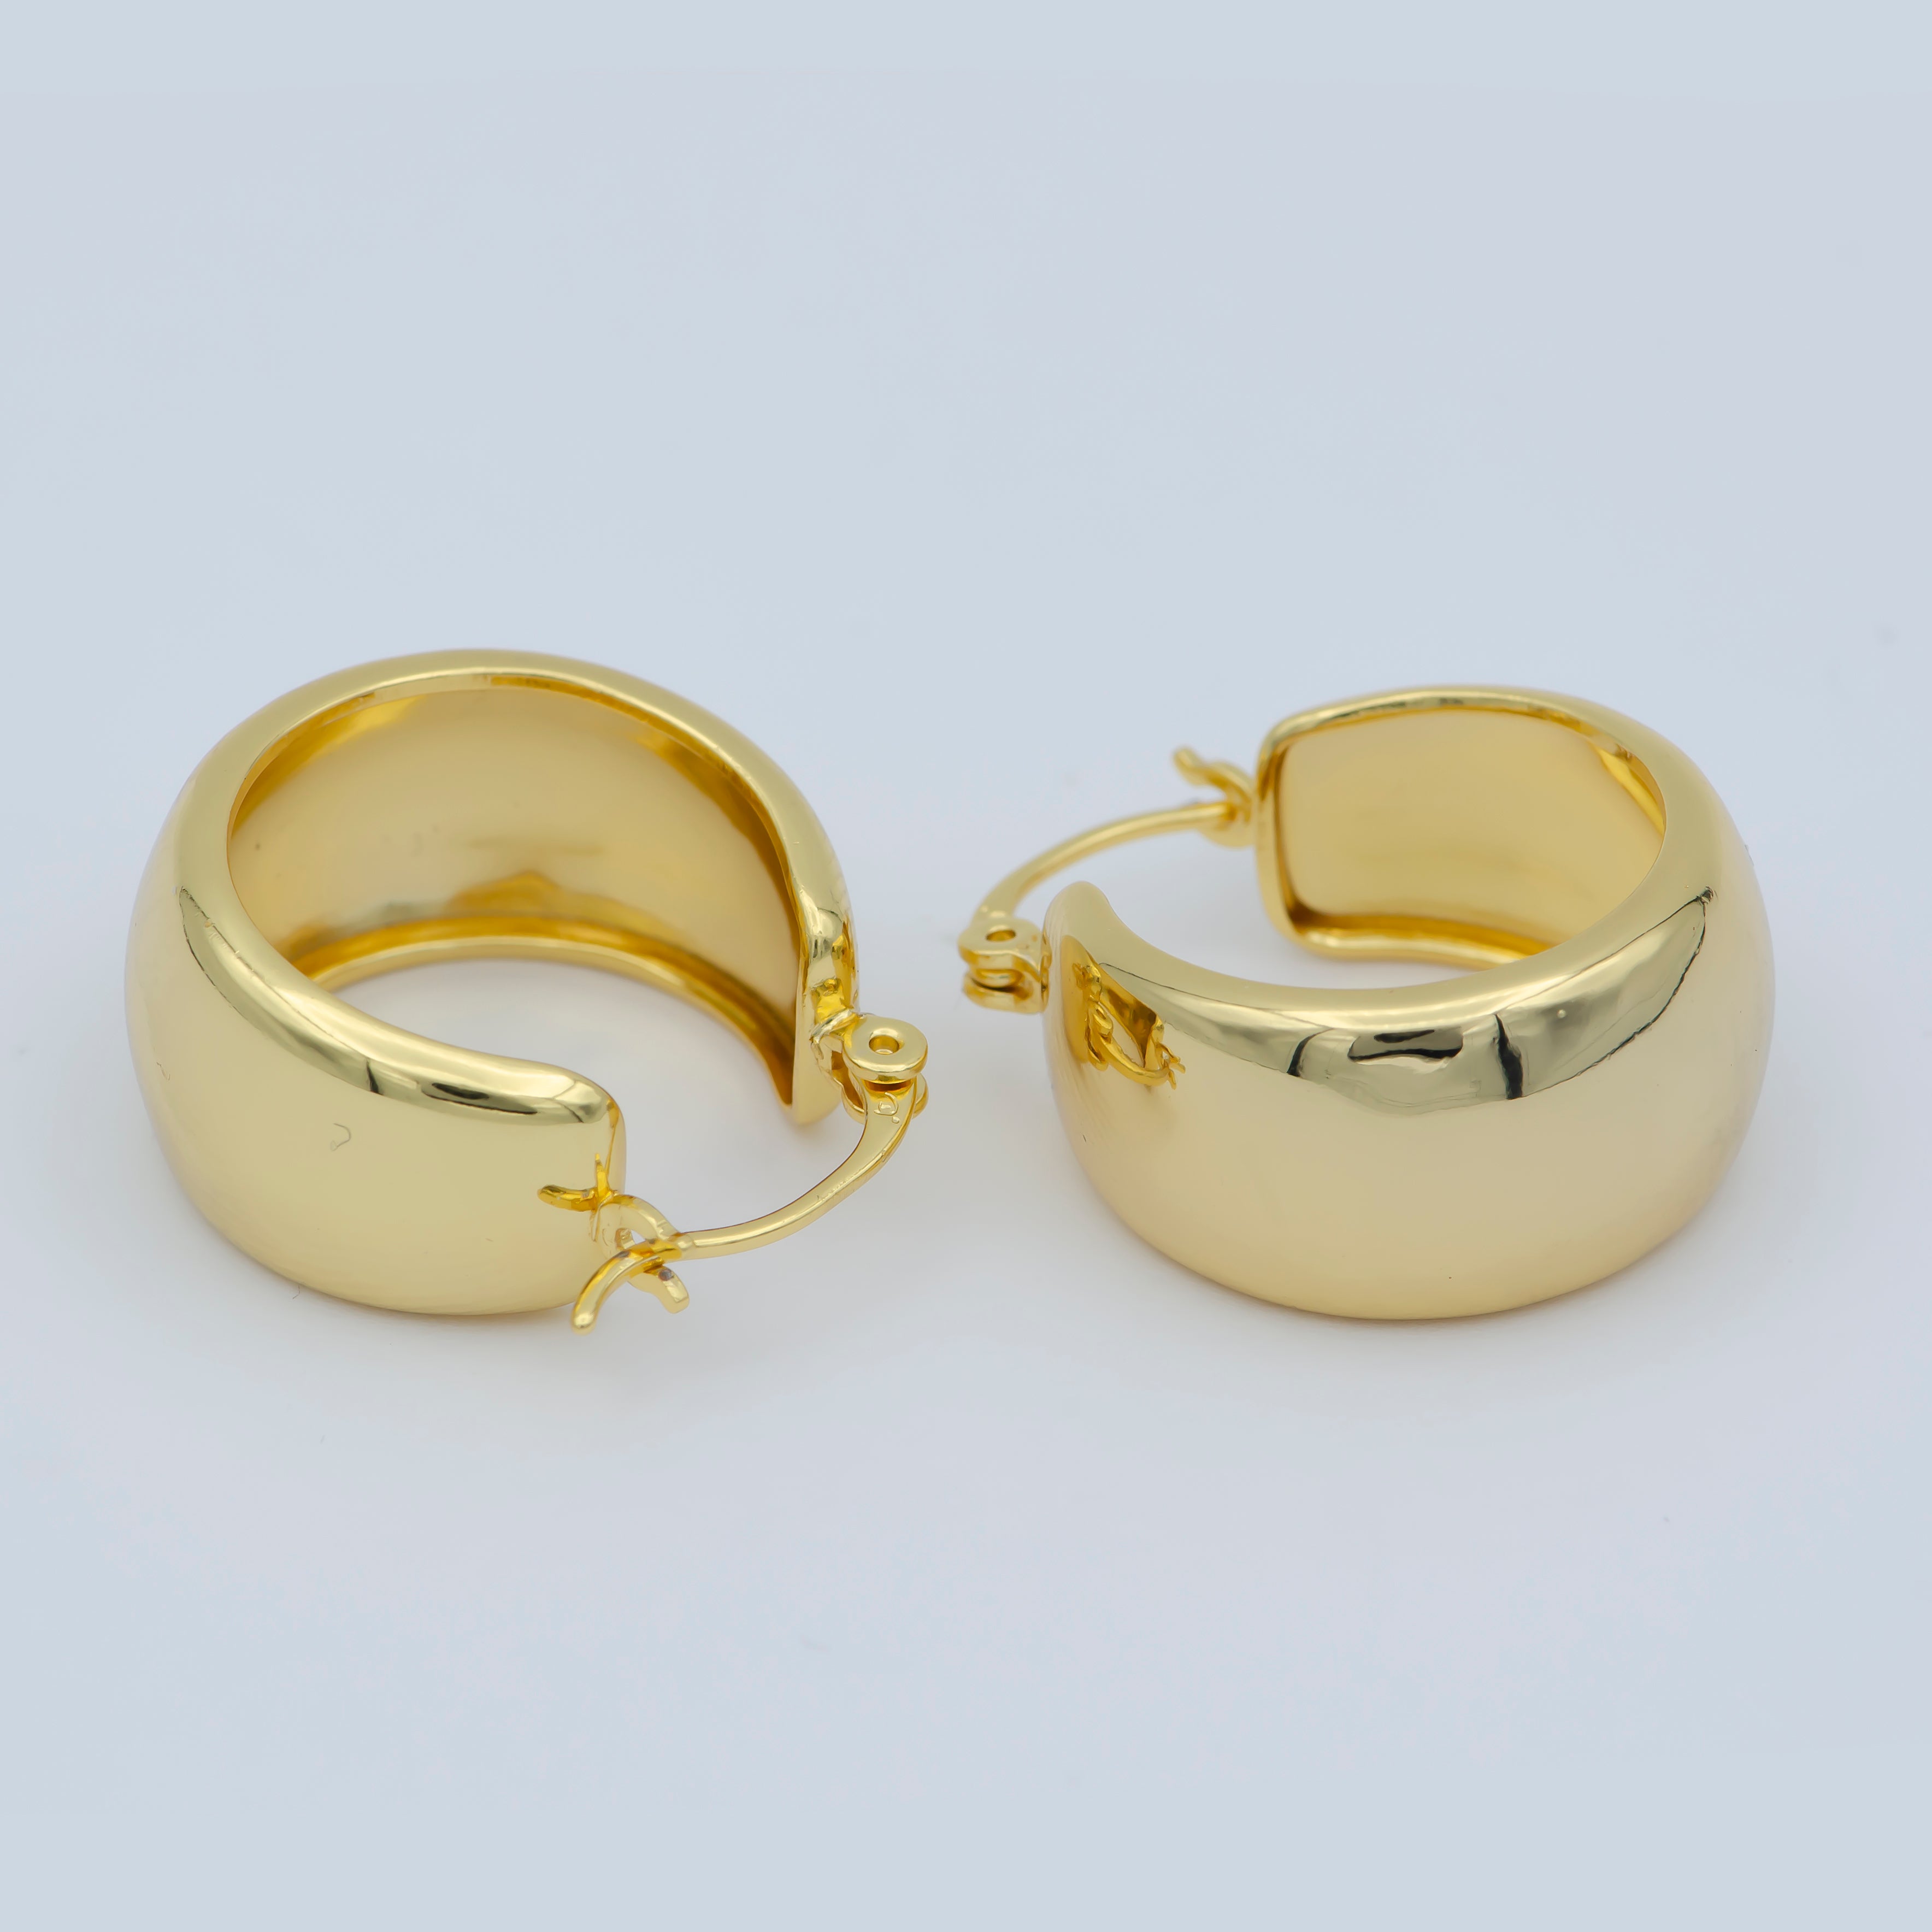 Chunky Gold Earrings, Minimalist Wide Dome Hoop Earrings in 24k Gold Filled Available in Thick Gold Chunky Hoops - DLUXCA